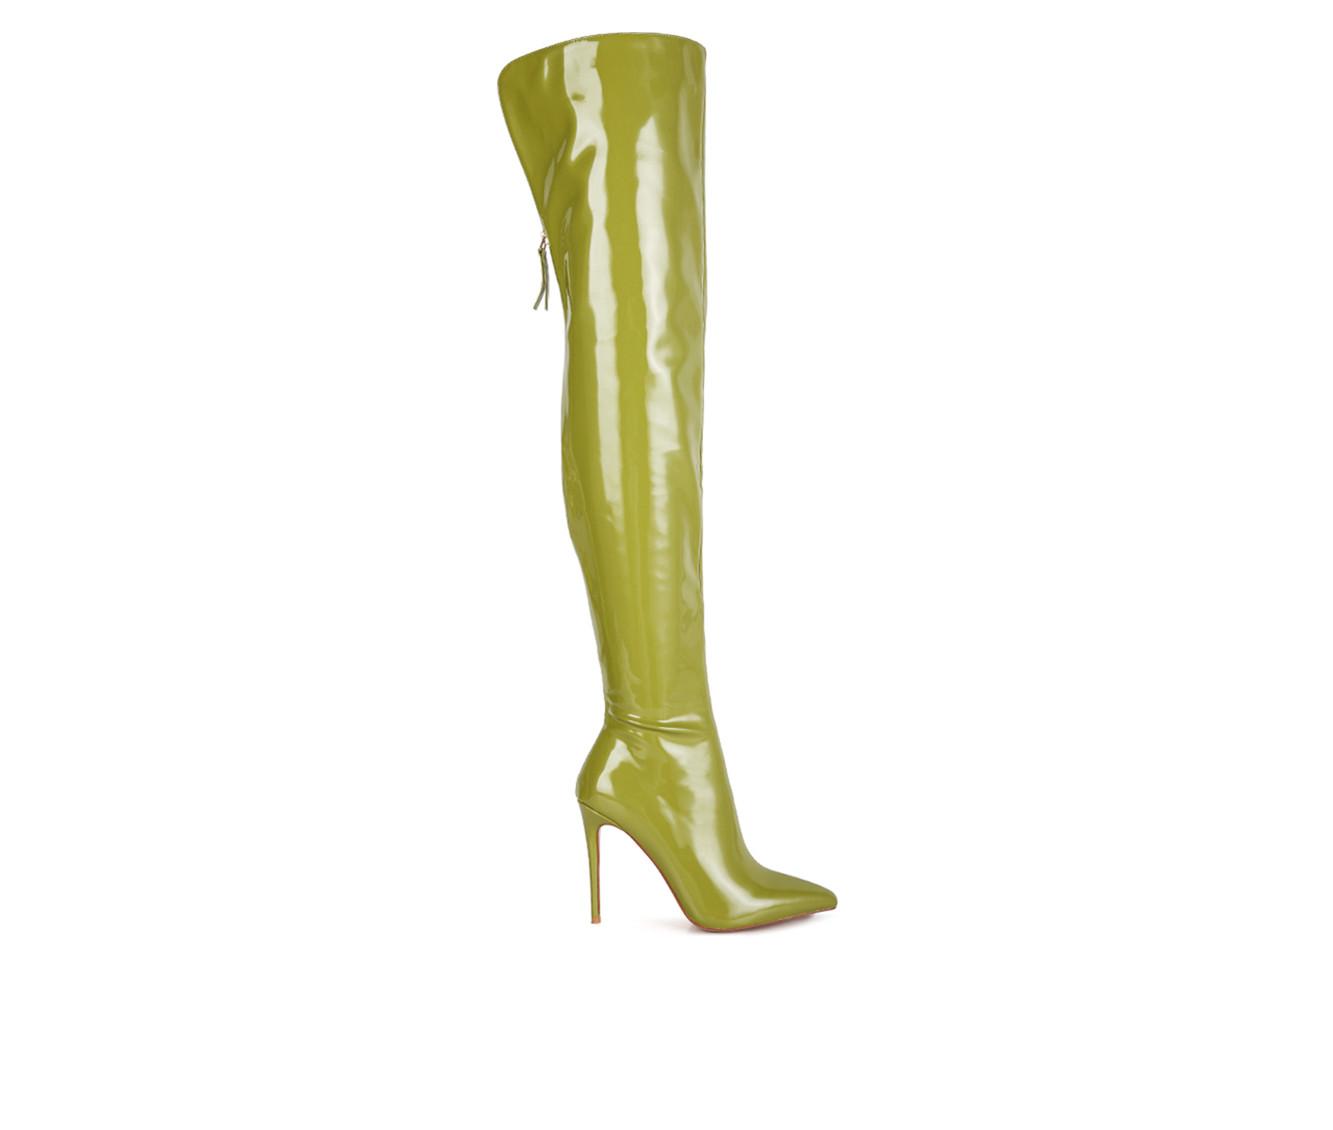 Women's London Rag Eclectic Over The Knee Stiletto Boots